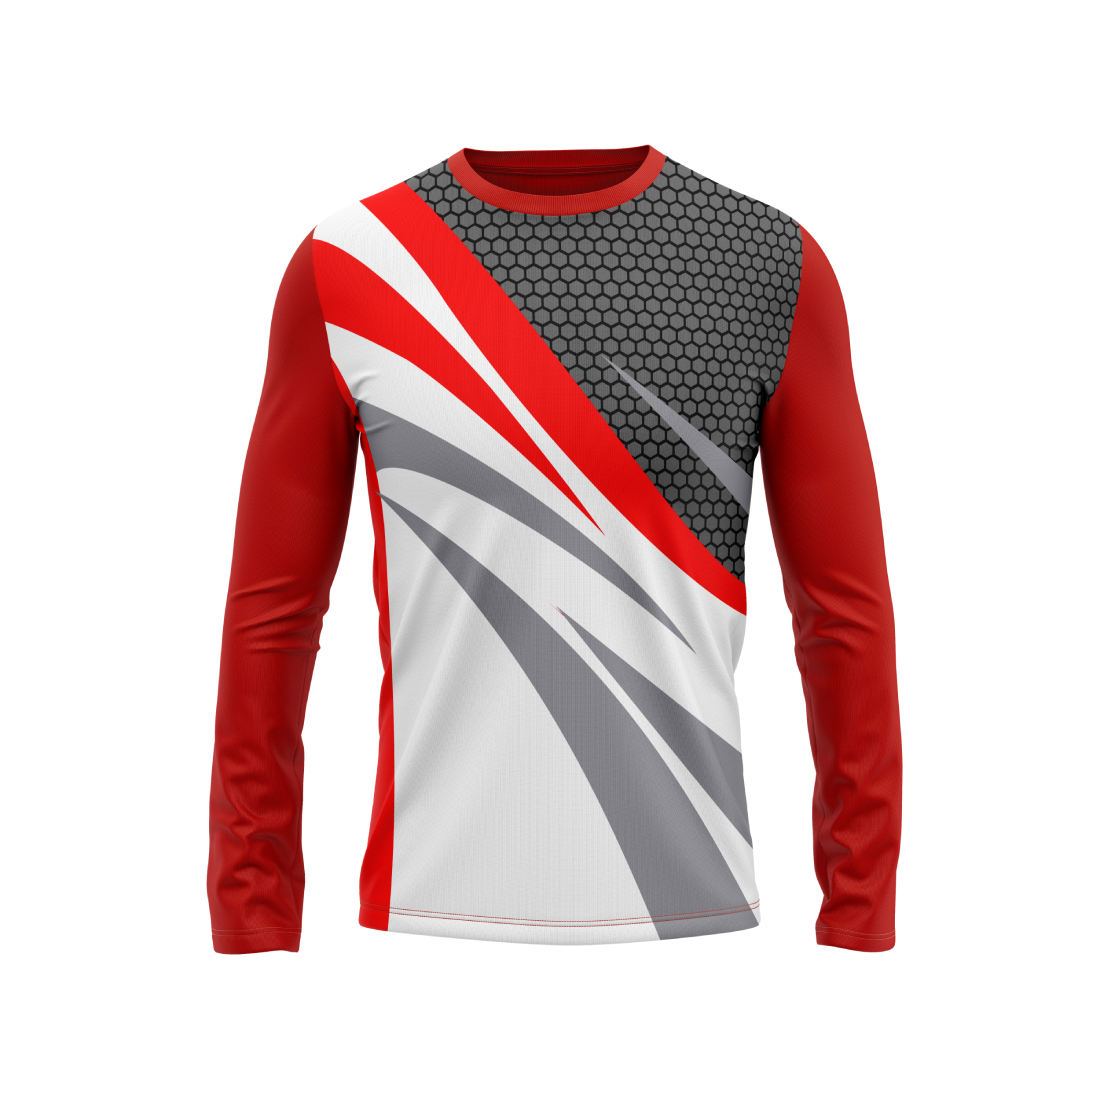 Round Neck Fullsleeve Printed Jersey Red NP00118